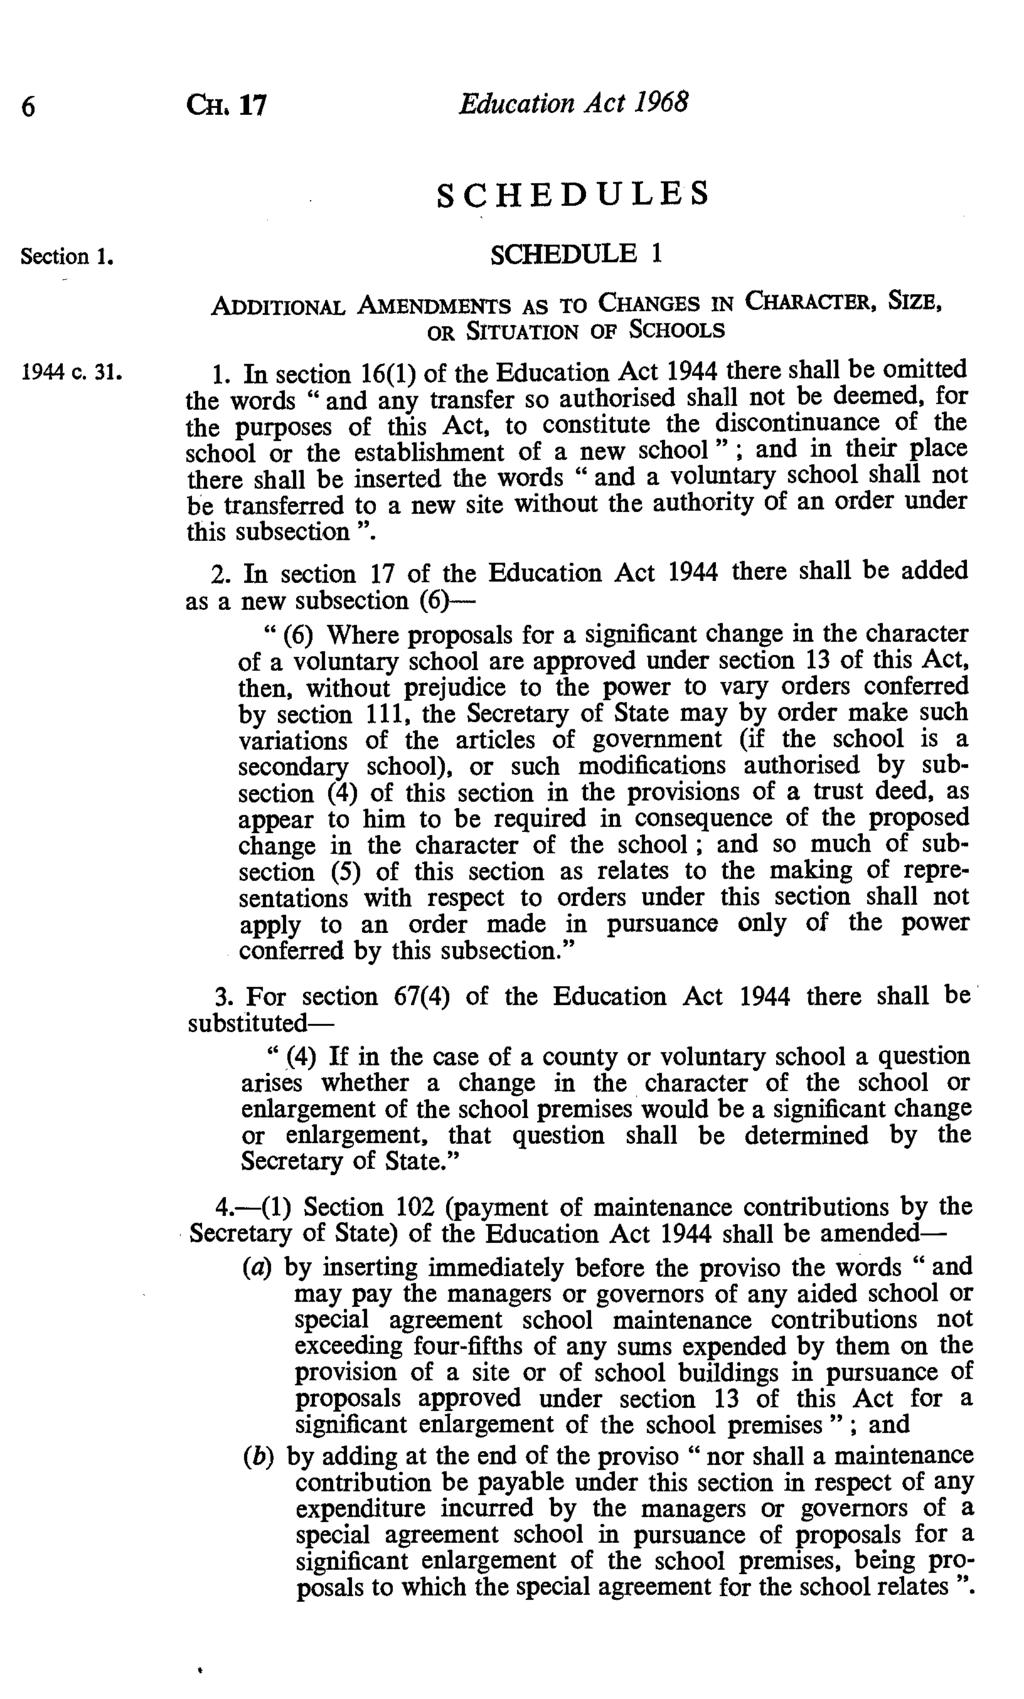 6 CH117 Education Act 1968 SCHEDULES Section 1. 1944 c. 31. SCHEDULE 1 ADDITIONAL AMENDMENTS AS TO CHANGES IN CHARACTER, SIZE, OR SITUATION OF SCHOOLS 1.